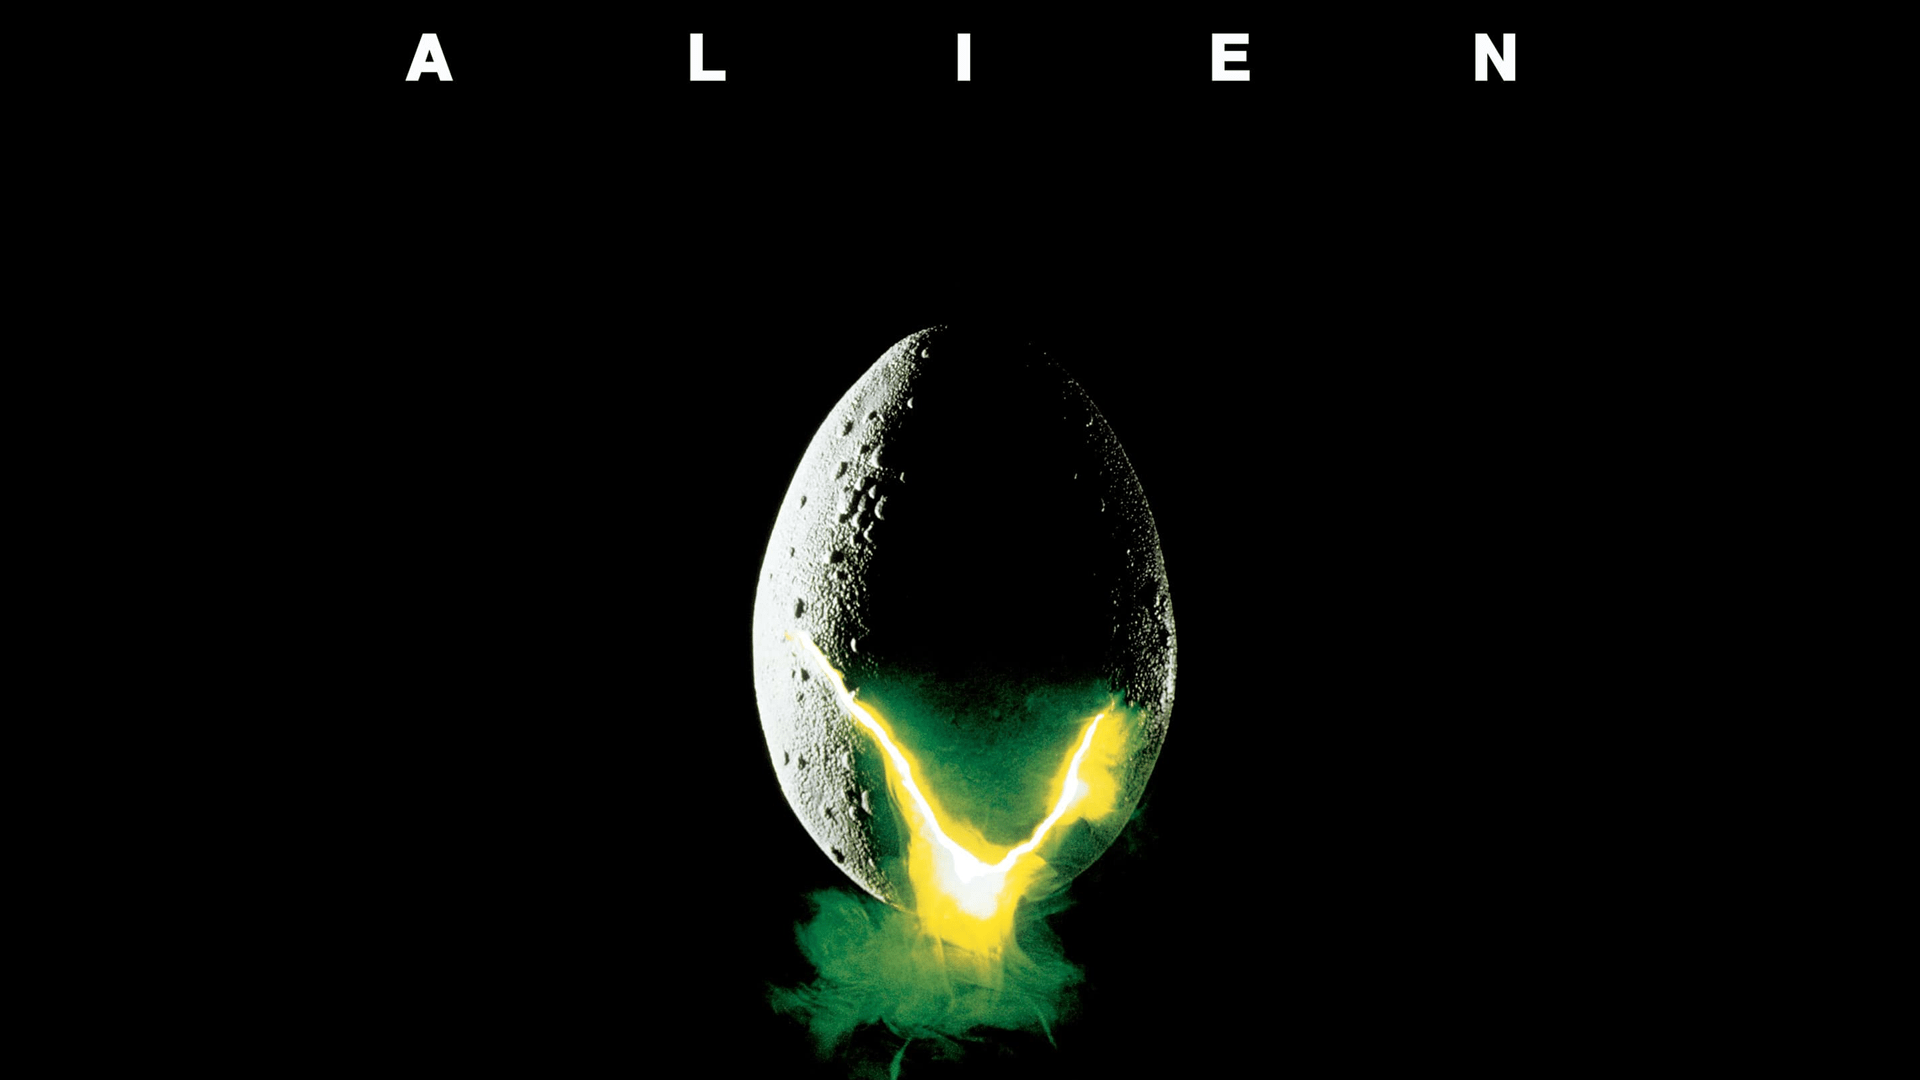 New ‘Alien’ Movie From Fede Álvarez Sets Cast, Filming Starts March 9